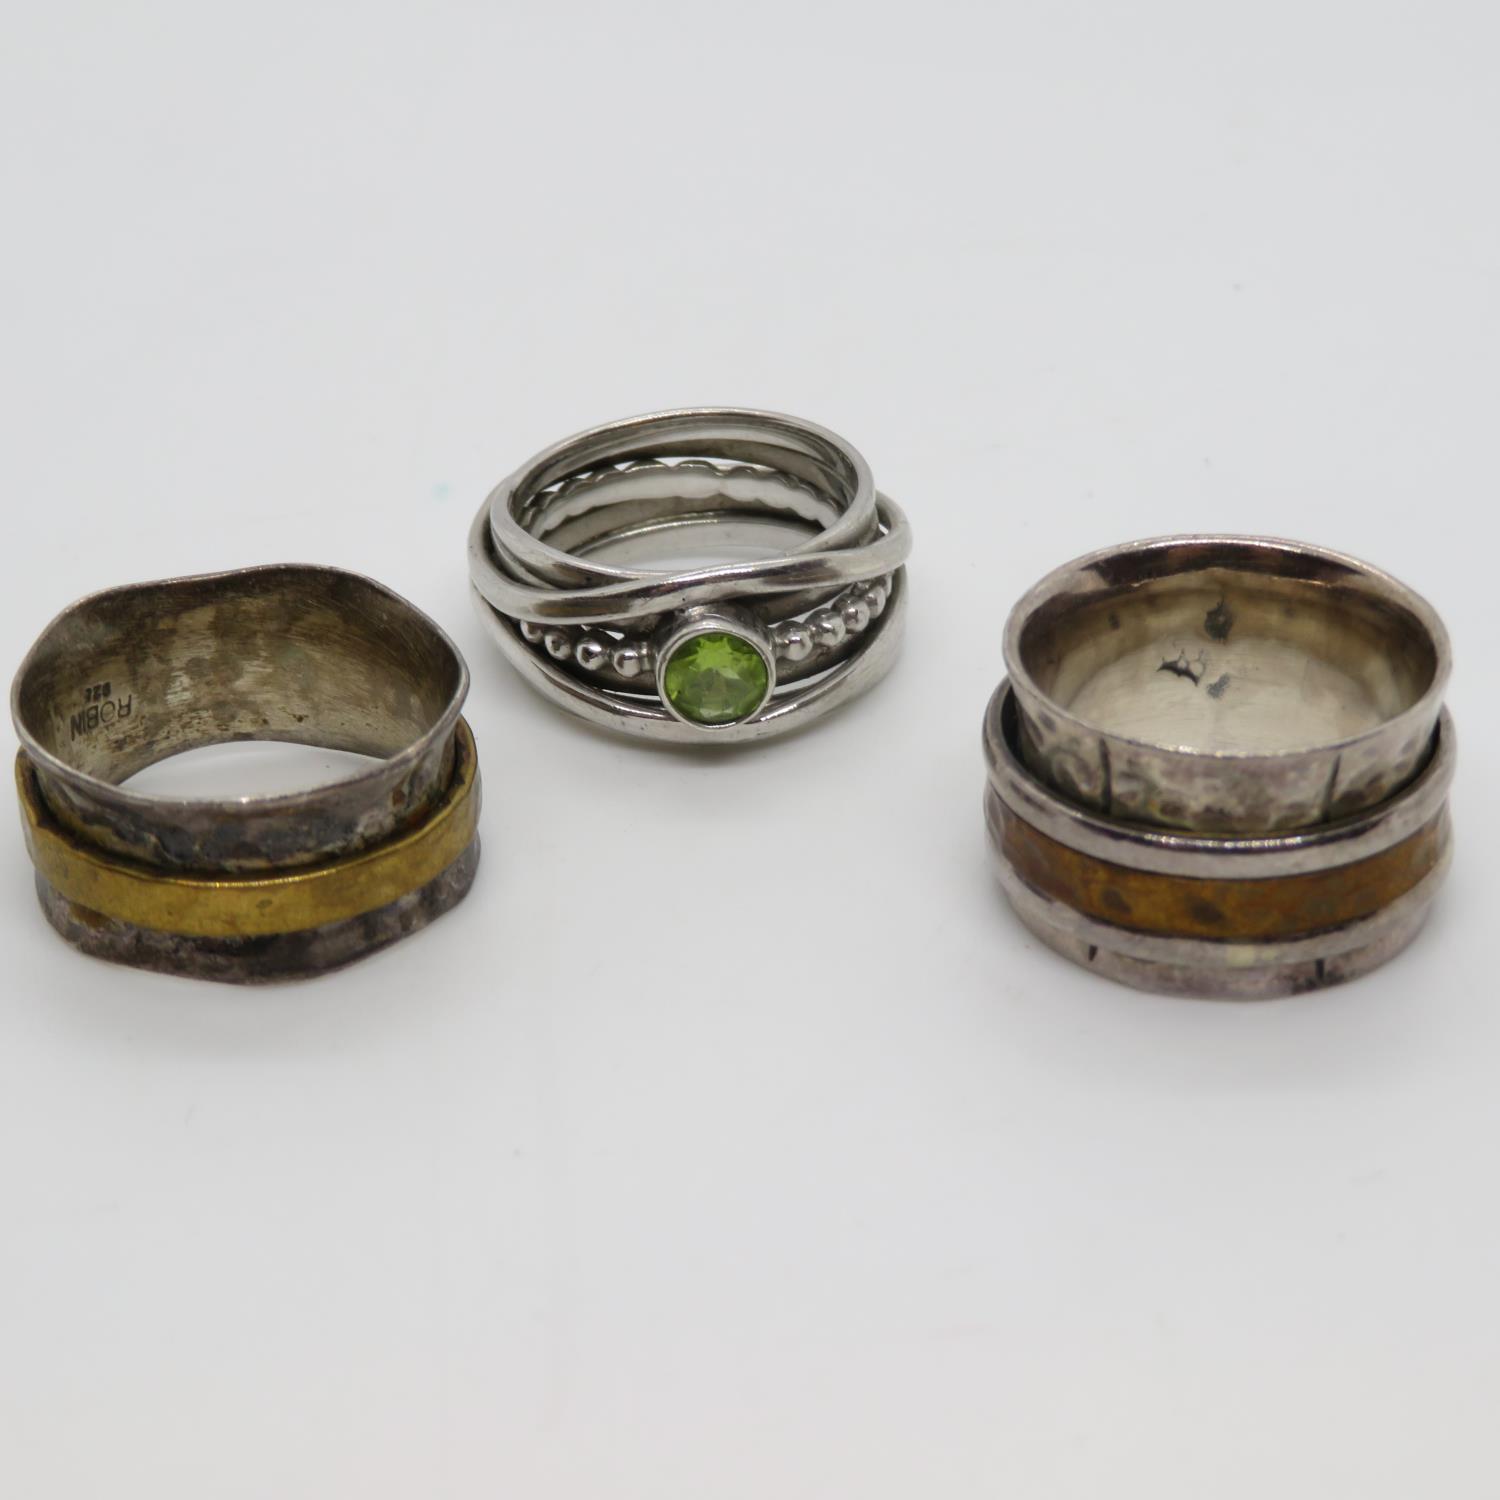 3x intricate design silver rings sizes O, P and Q 26.8g total weight